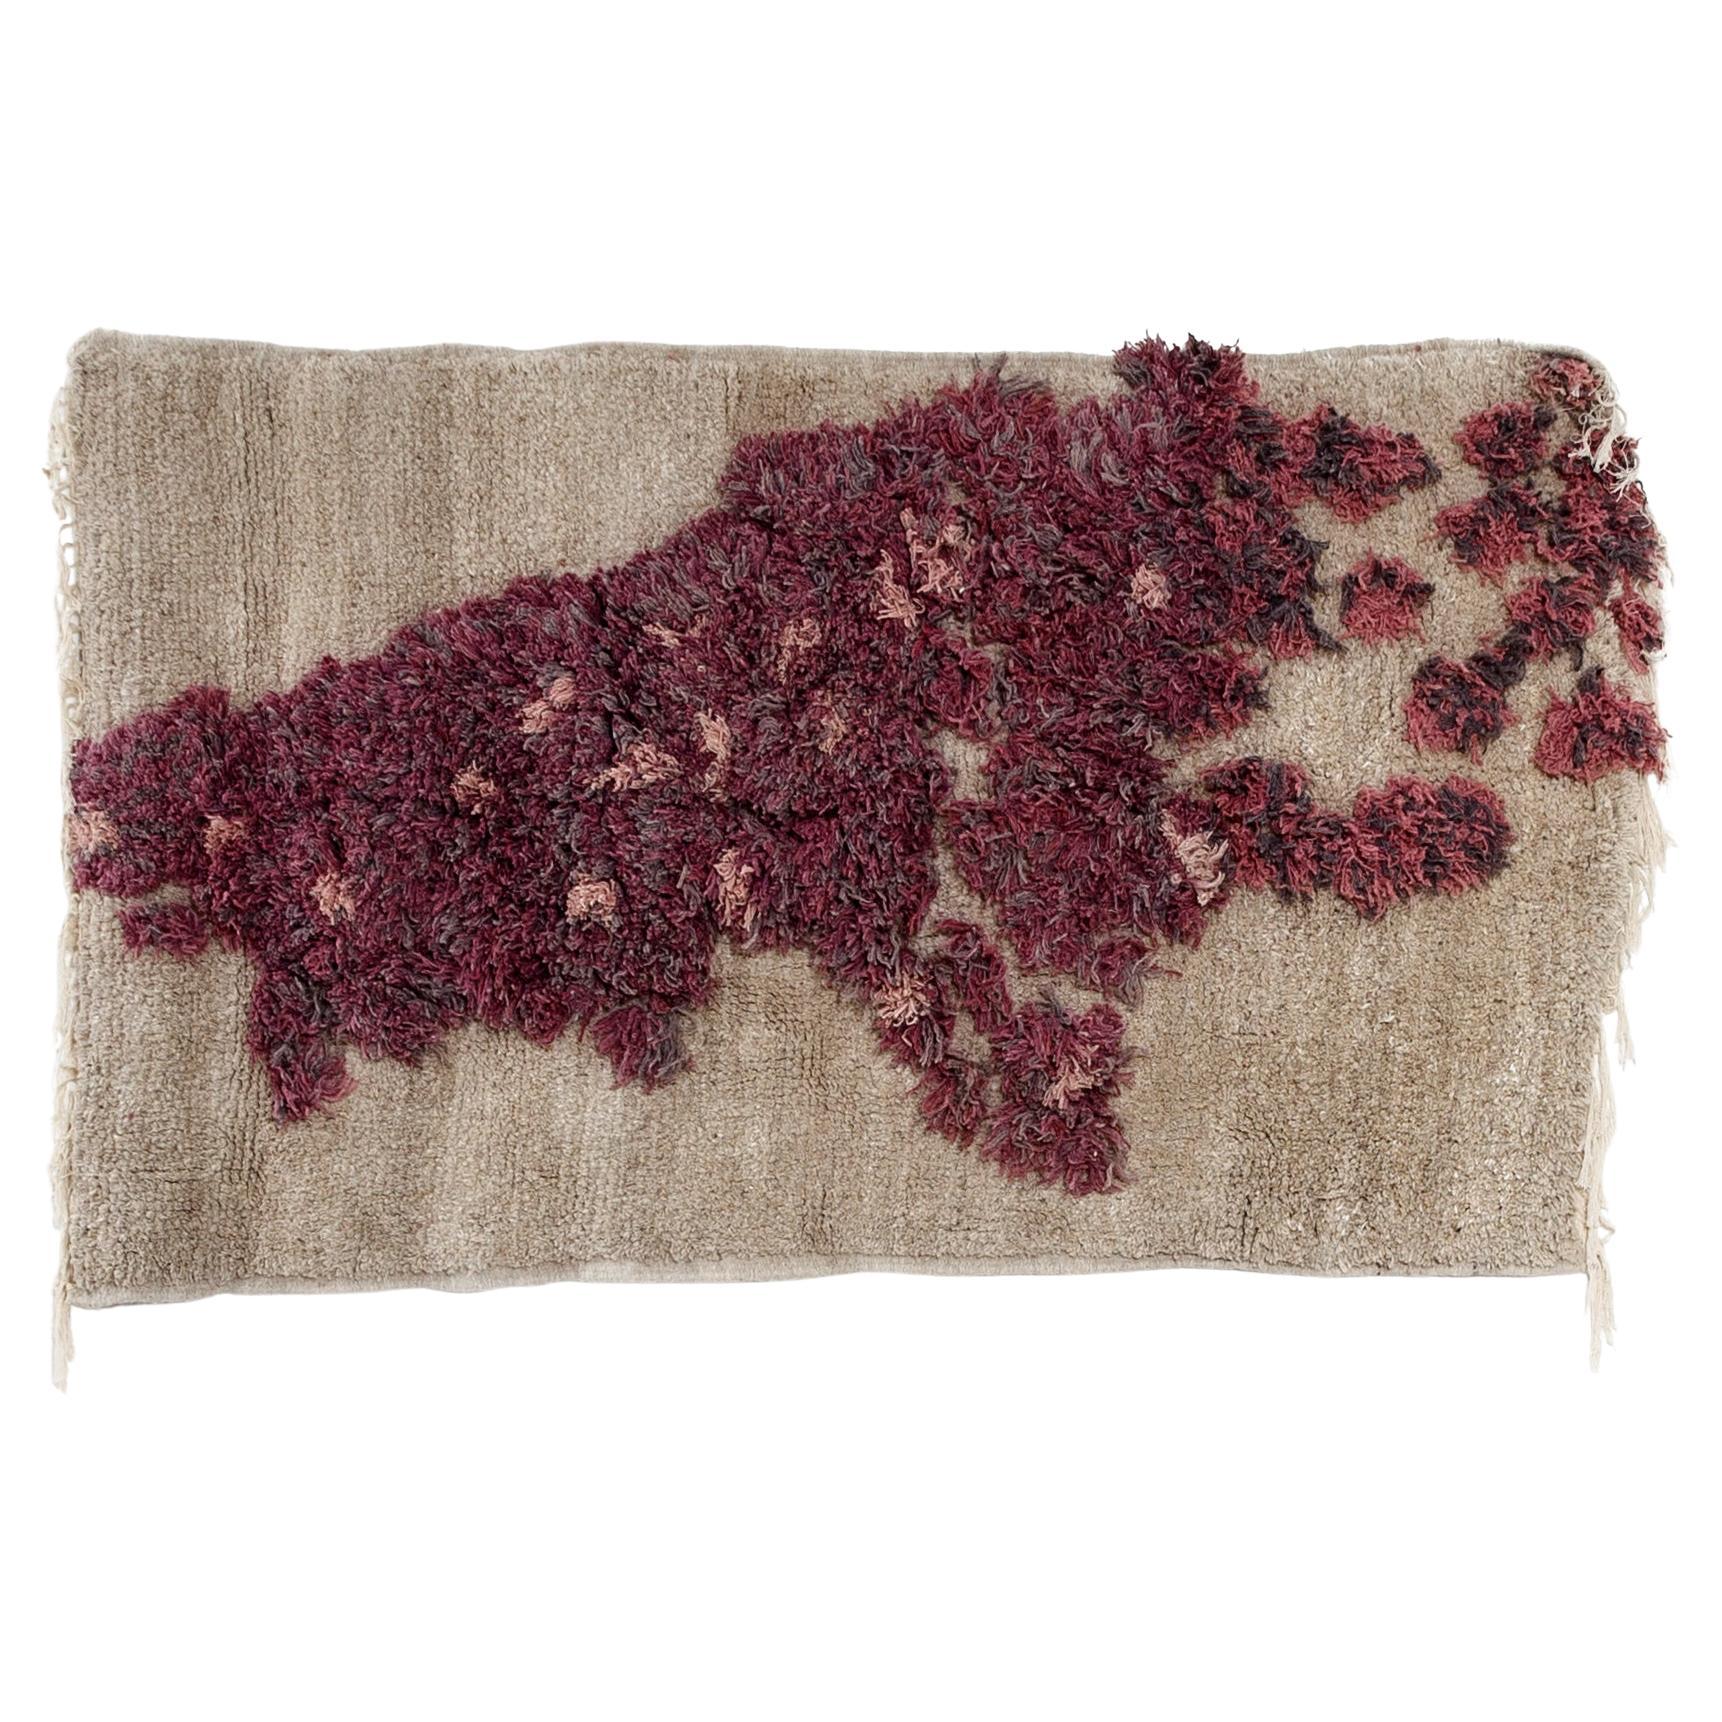 Lake, Wool Wall Carpet Hand Knotted in Ethiopia, Designed by Hettler.Tüllmann For Sale